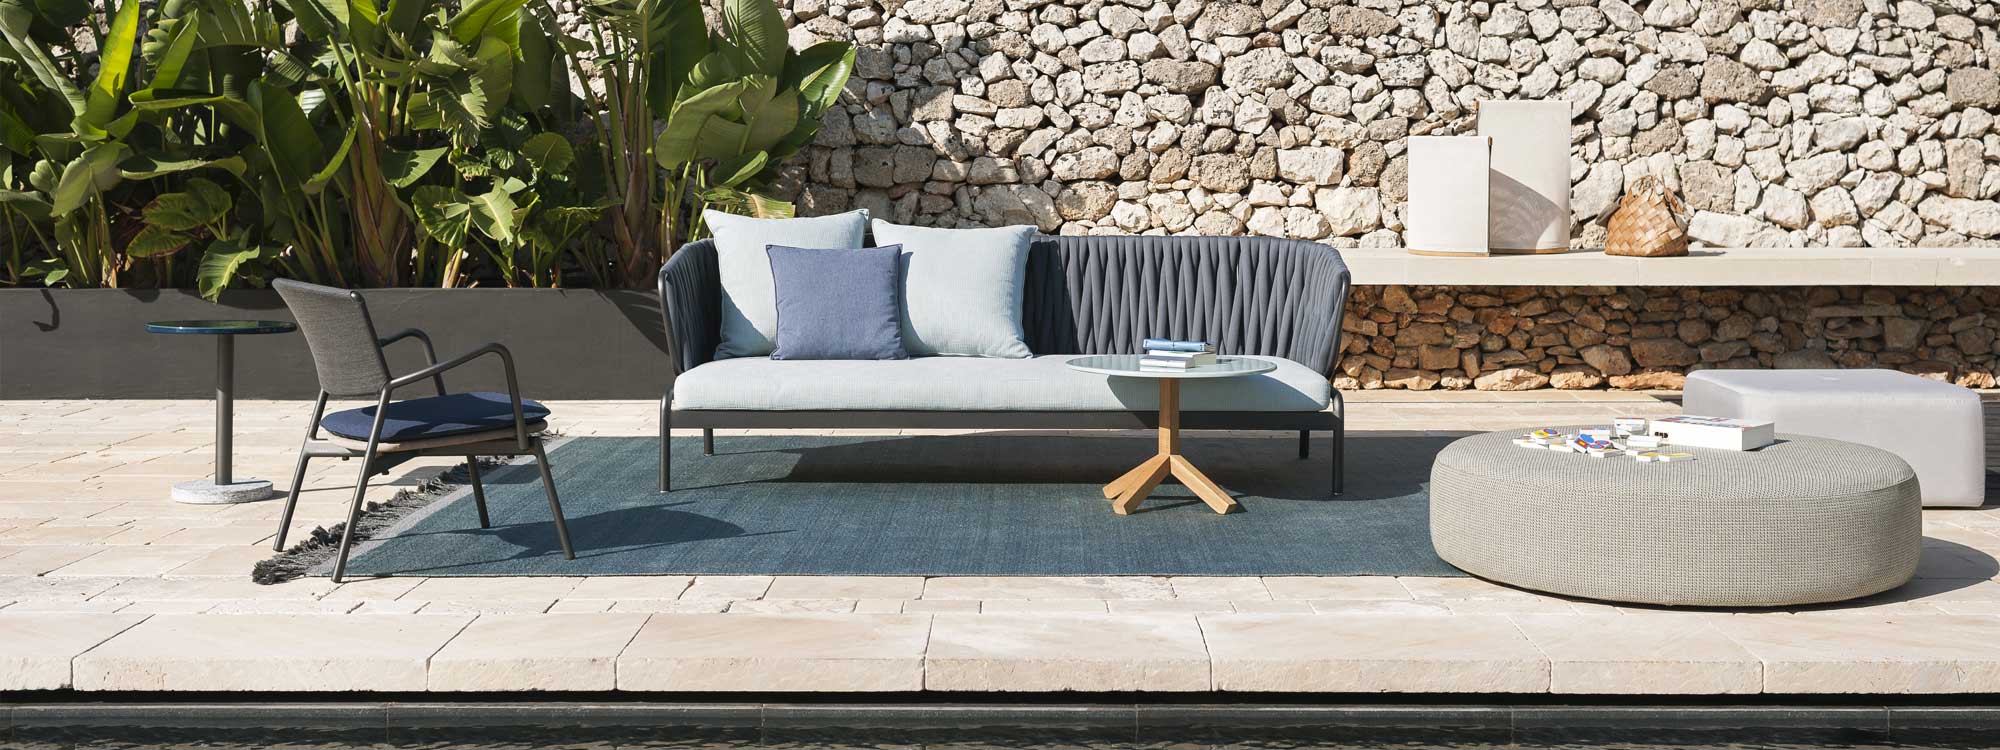 Image of RODA Spool 3 seater garden sofa with grey padded belt back and light-grey cushions, shown with Root side able and Double pouf